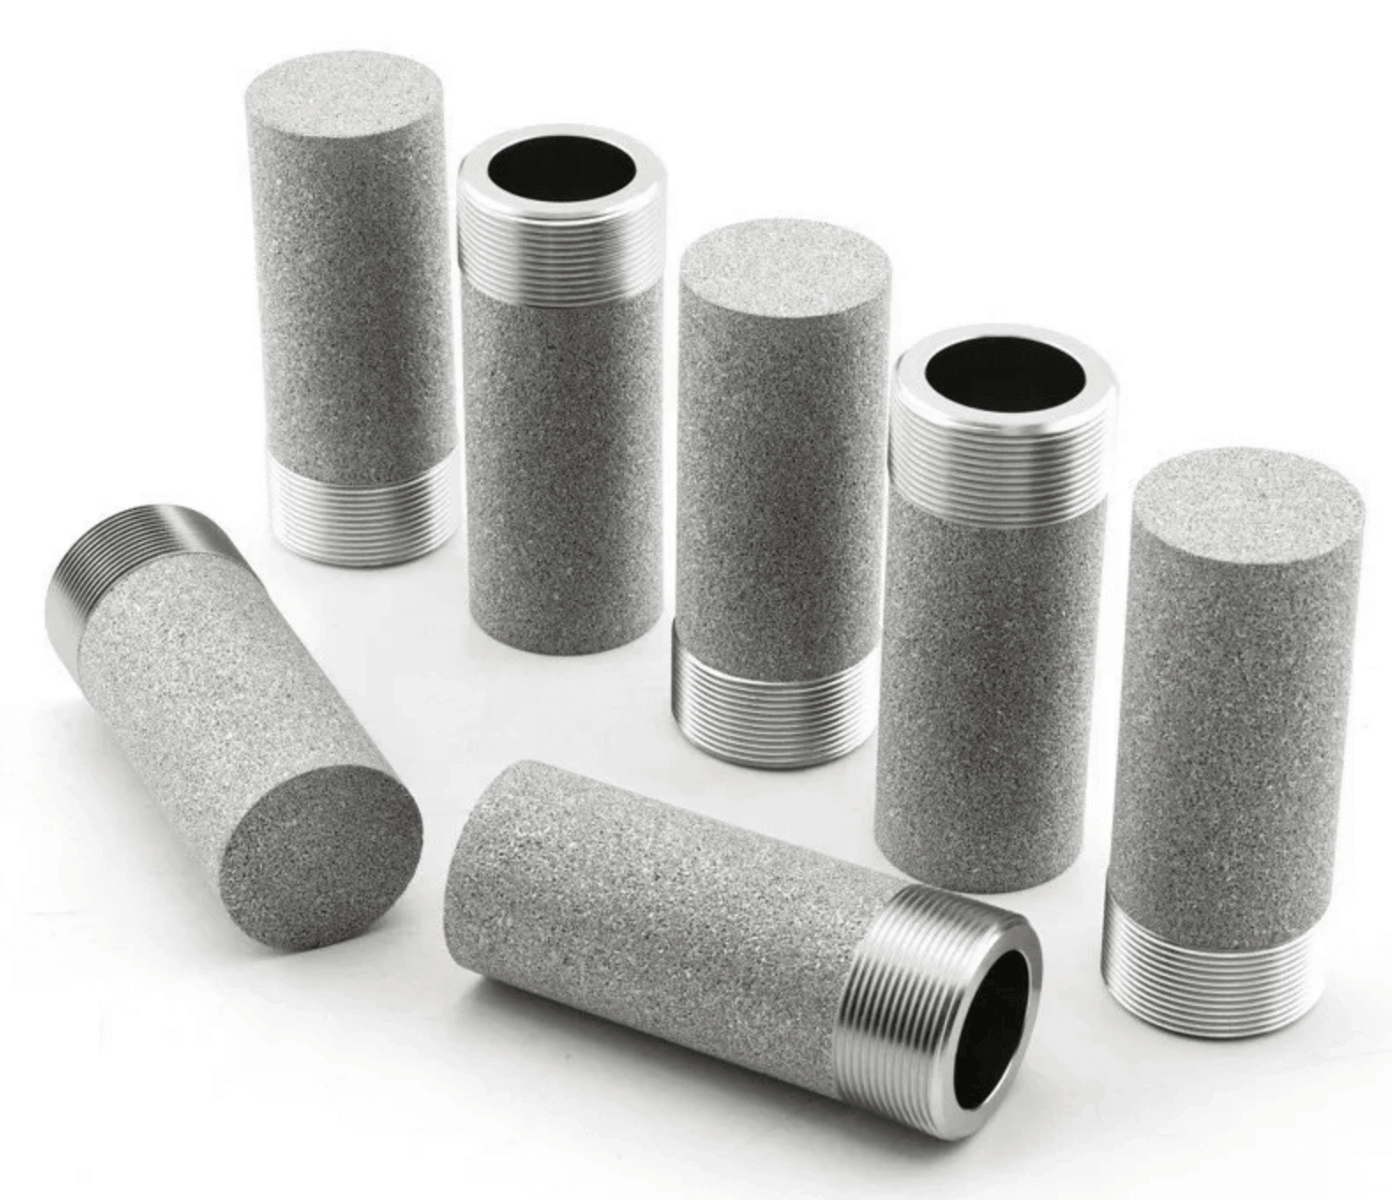 Replacement for the Poral/Sintertech Porous Stainless steel Isostatic Tubes (IS)